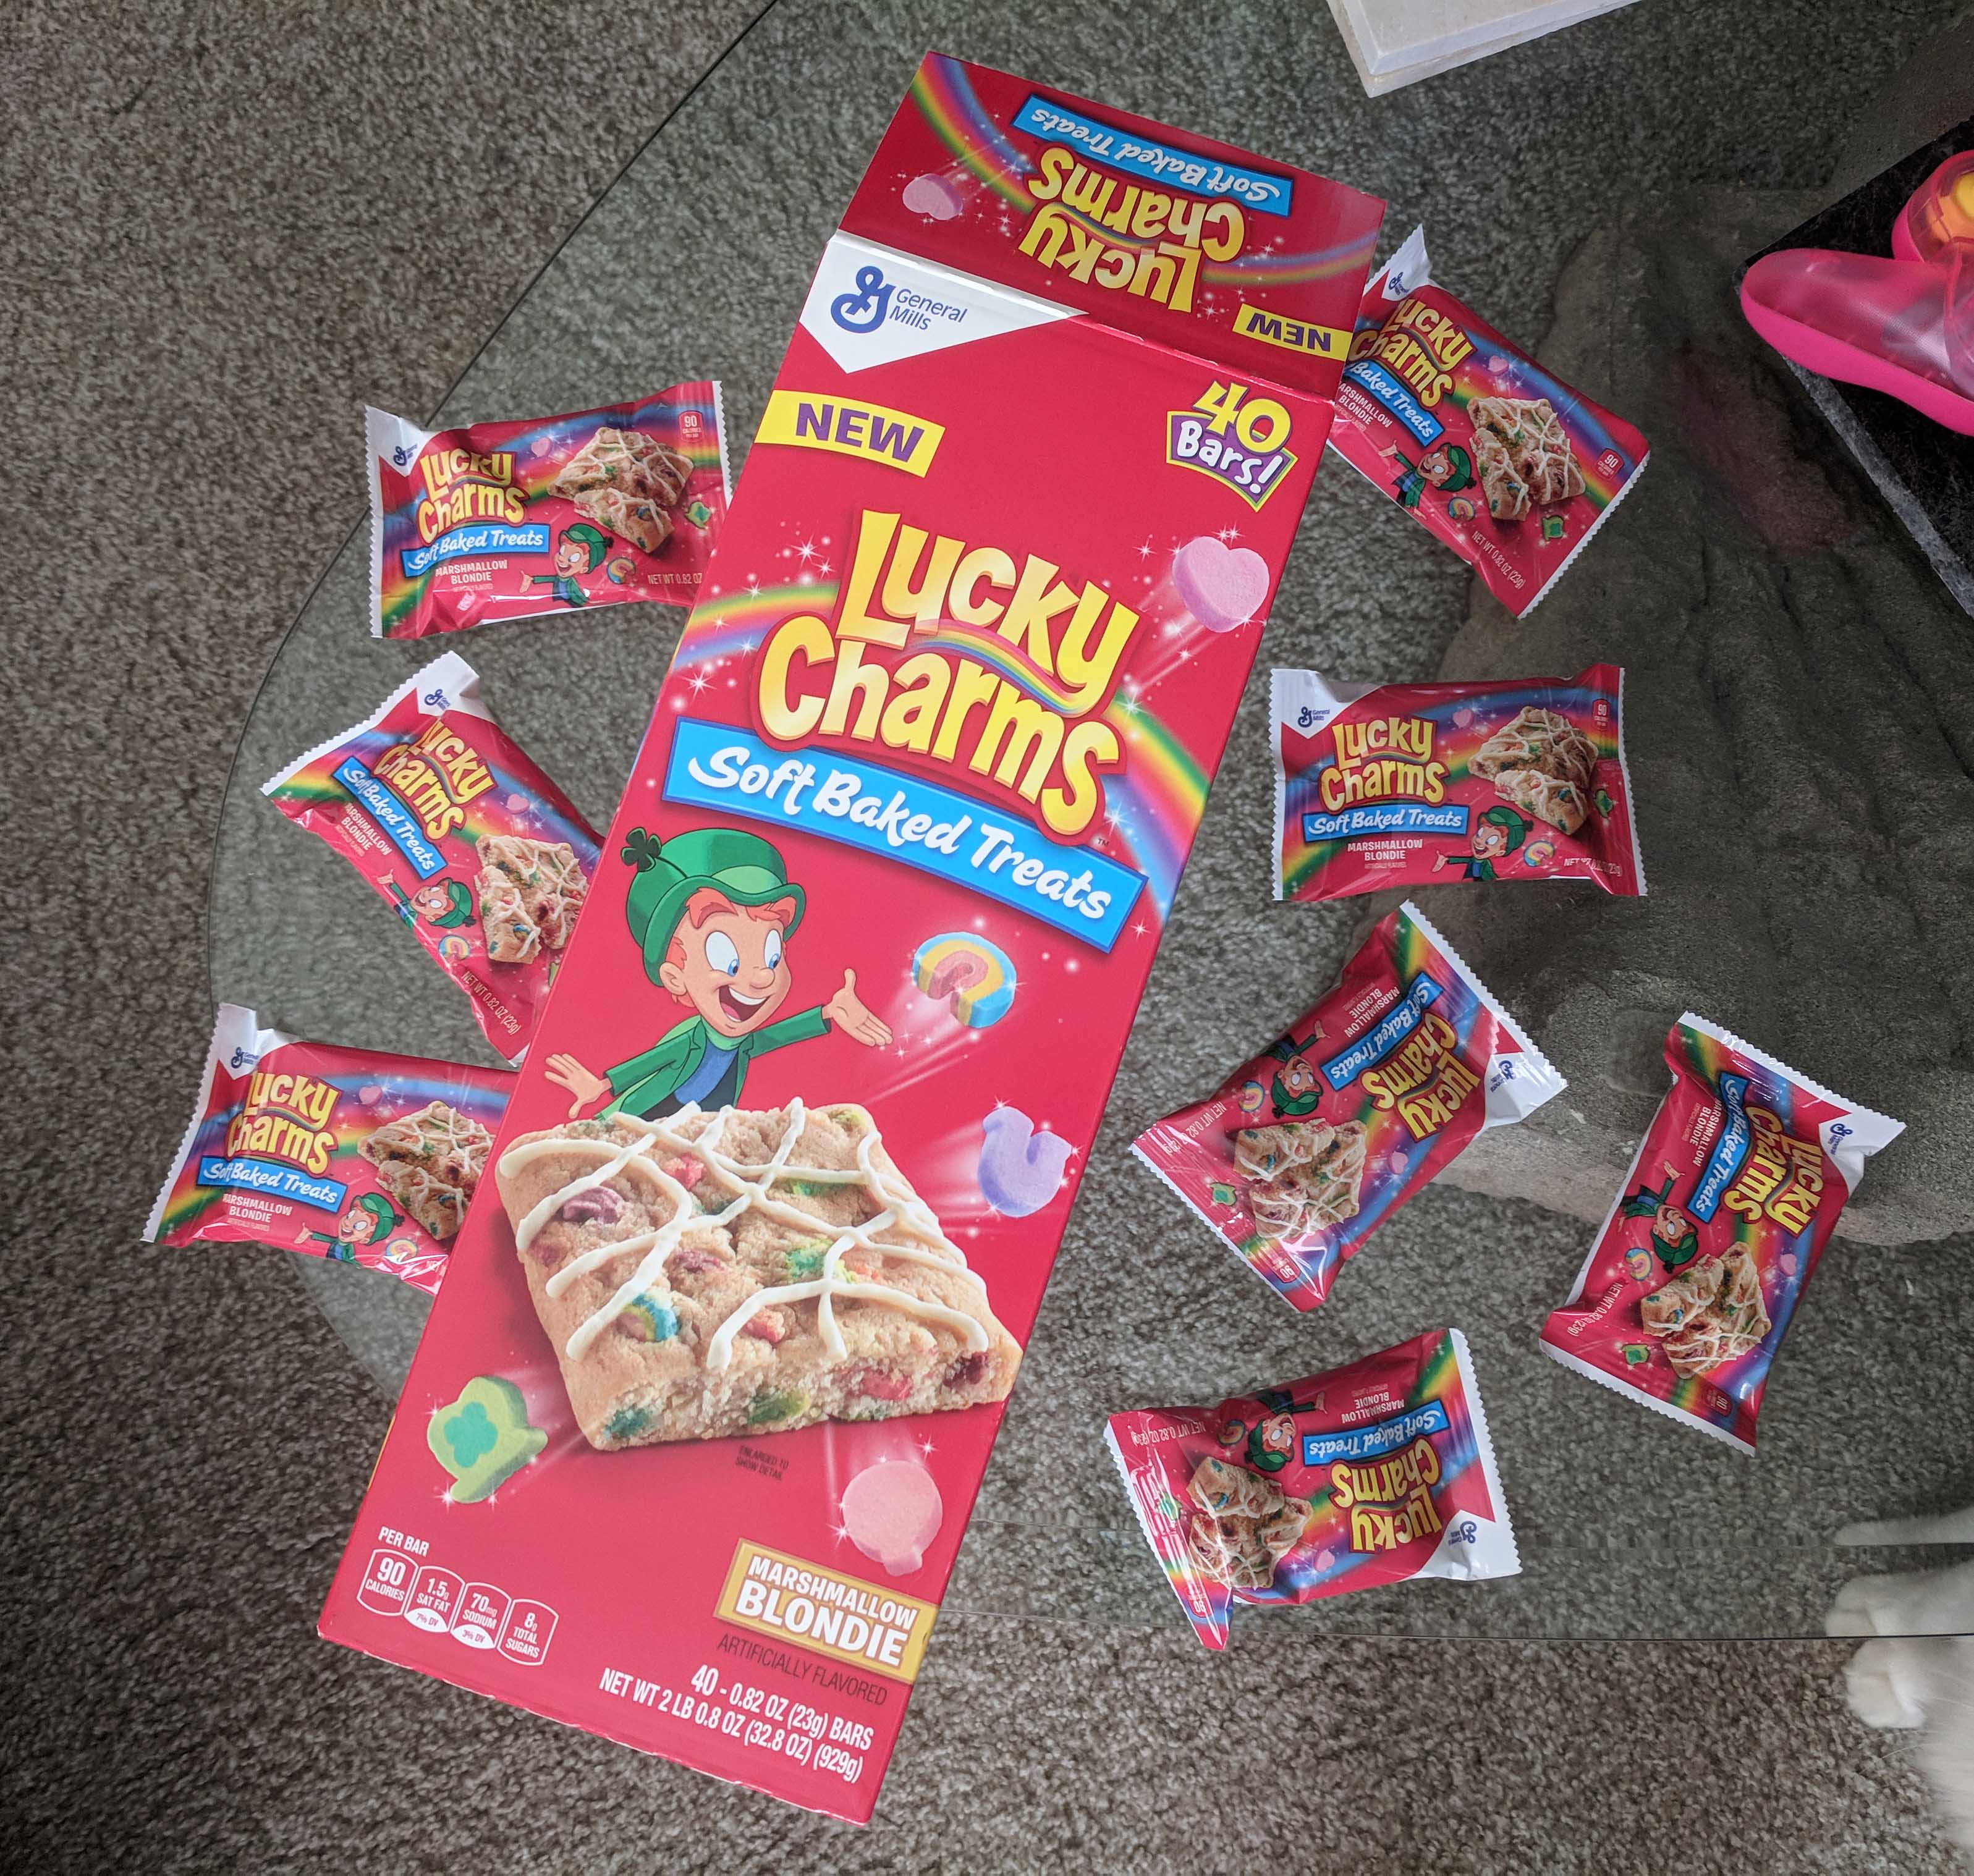 Lucky Charms Treats, Delicious Cereal Bars